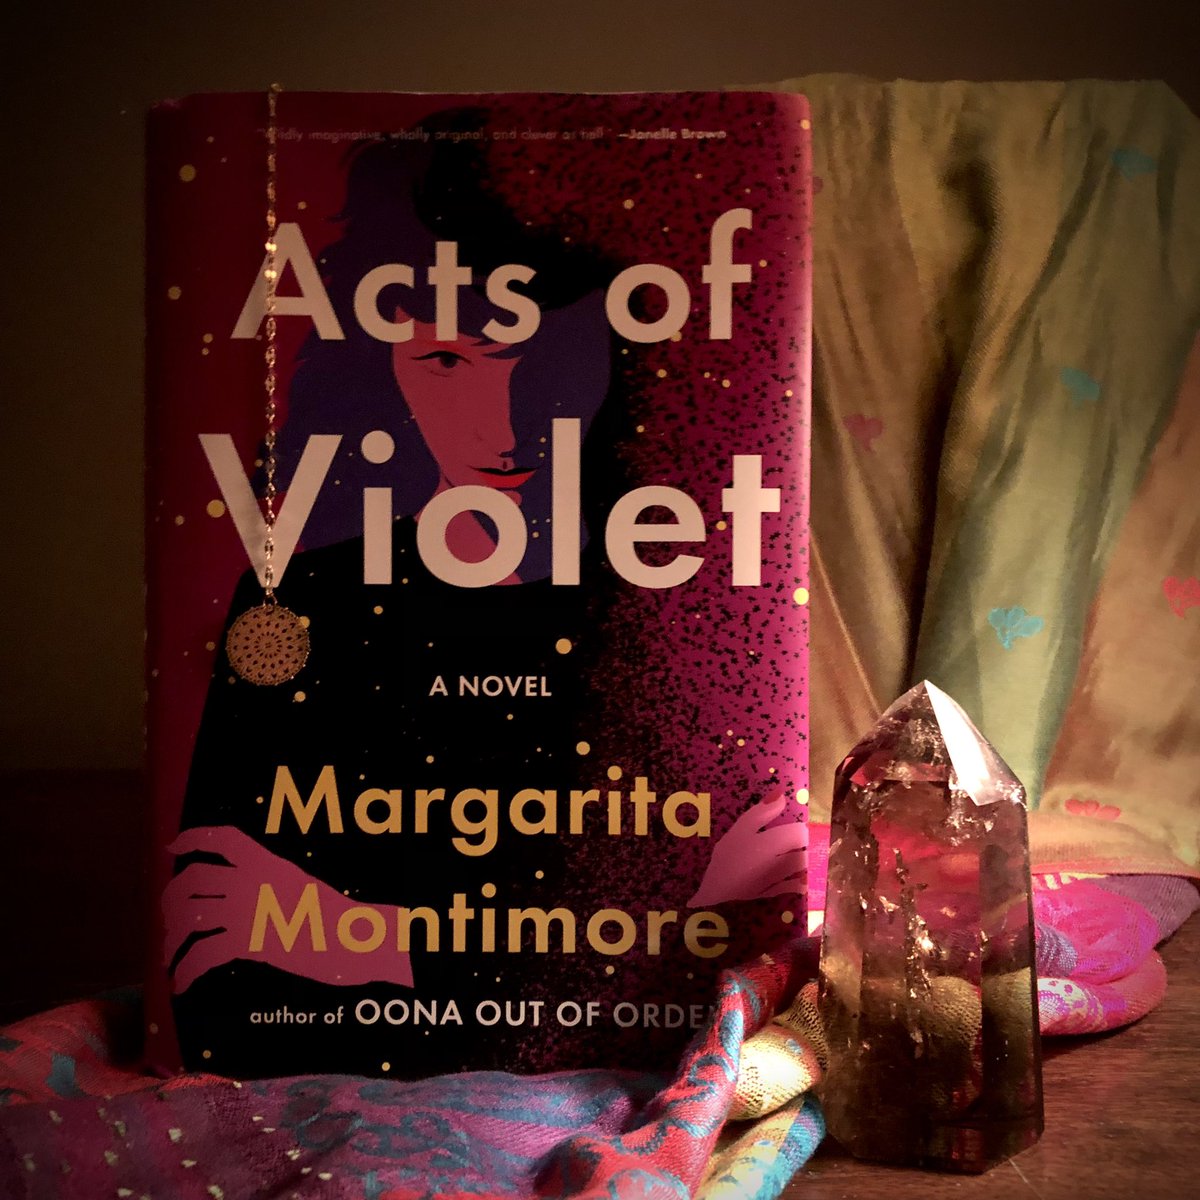 Thank you @flatironbooks for sending @damiella’s newest work of wonder, ACTS OF VIOLET! So excited to hide away and read it today…